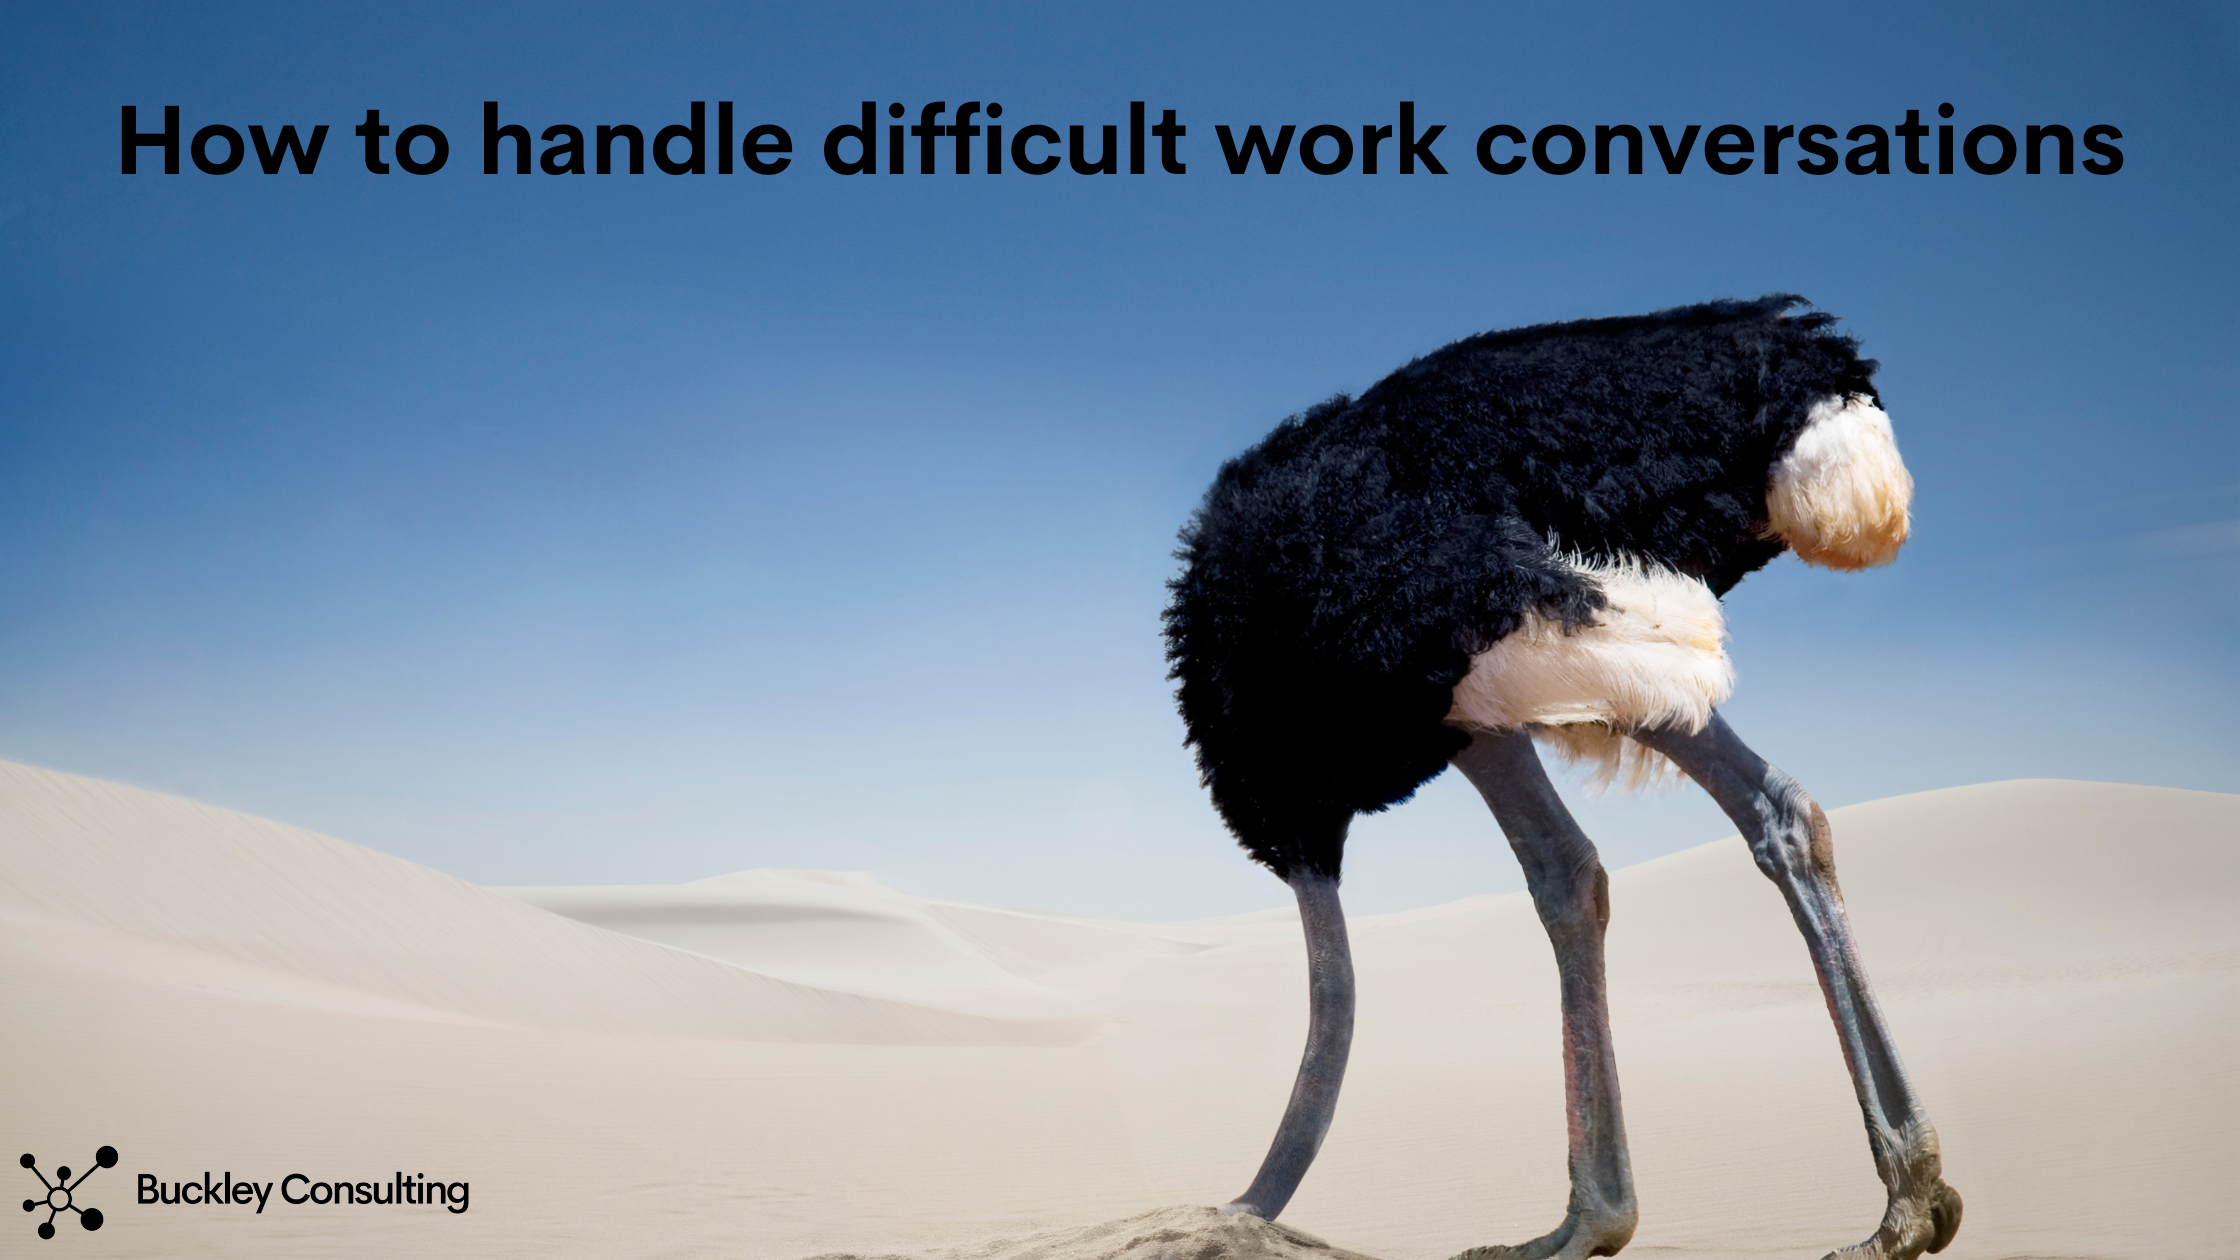 How to handle difficult work conversations